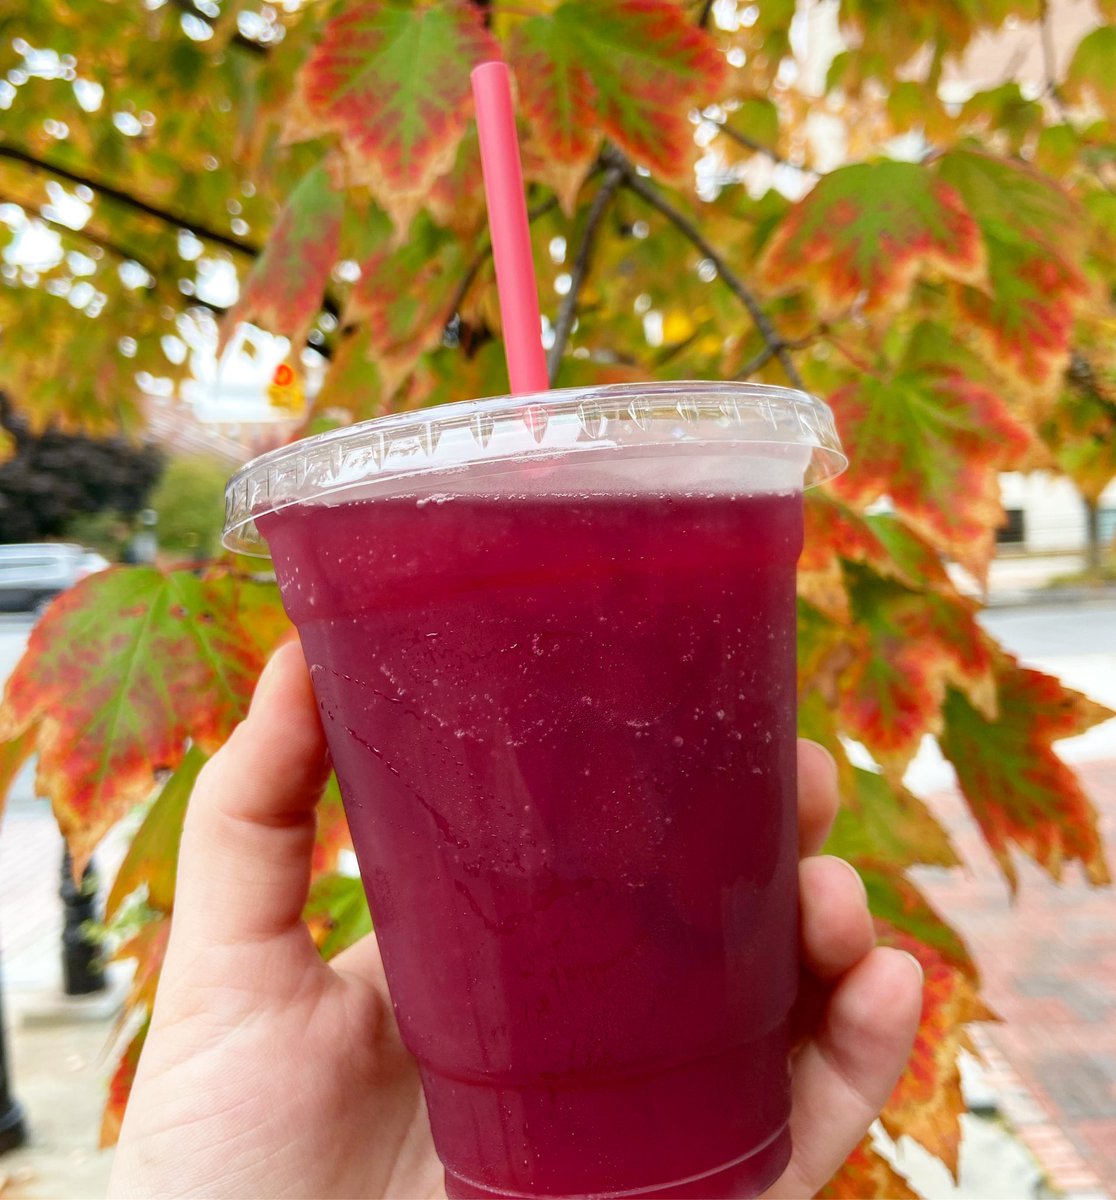 Fruity Fall slushees available today! 🍁 We’re open 12-4 🌞